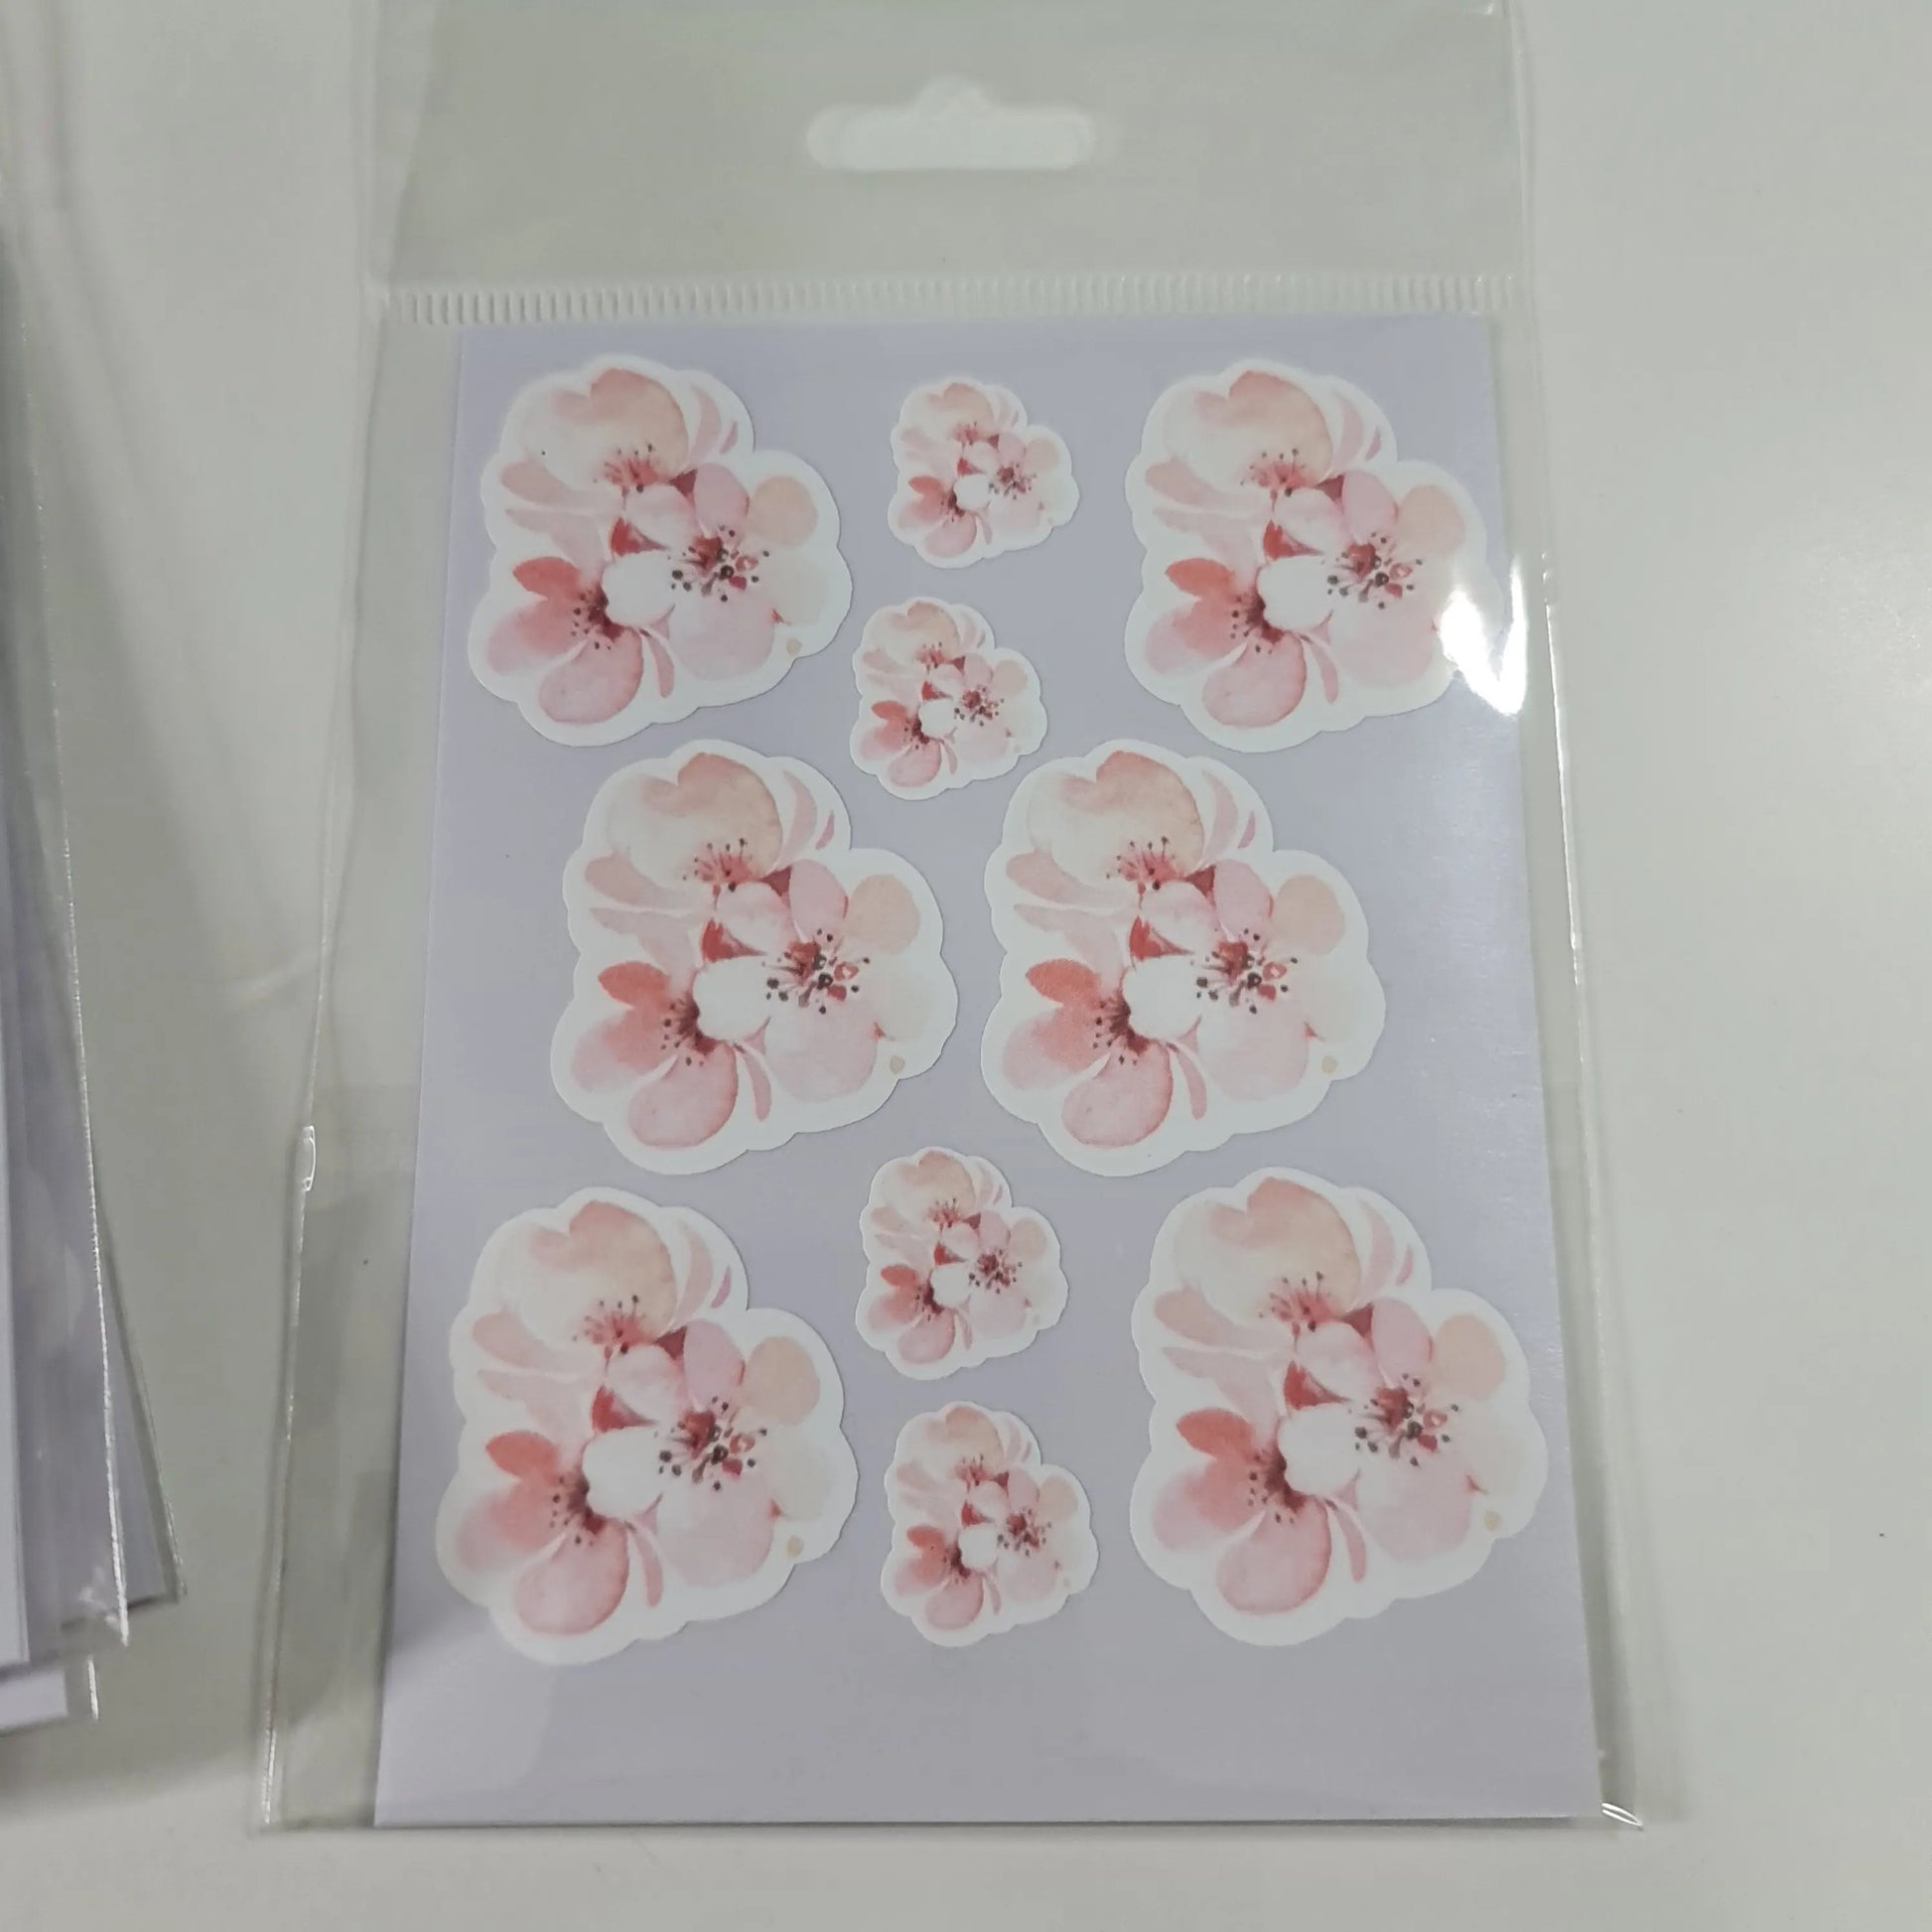 Sakura Blossom Stickers - Mixed sizes - 20 Pack Paper Love Cards